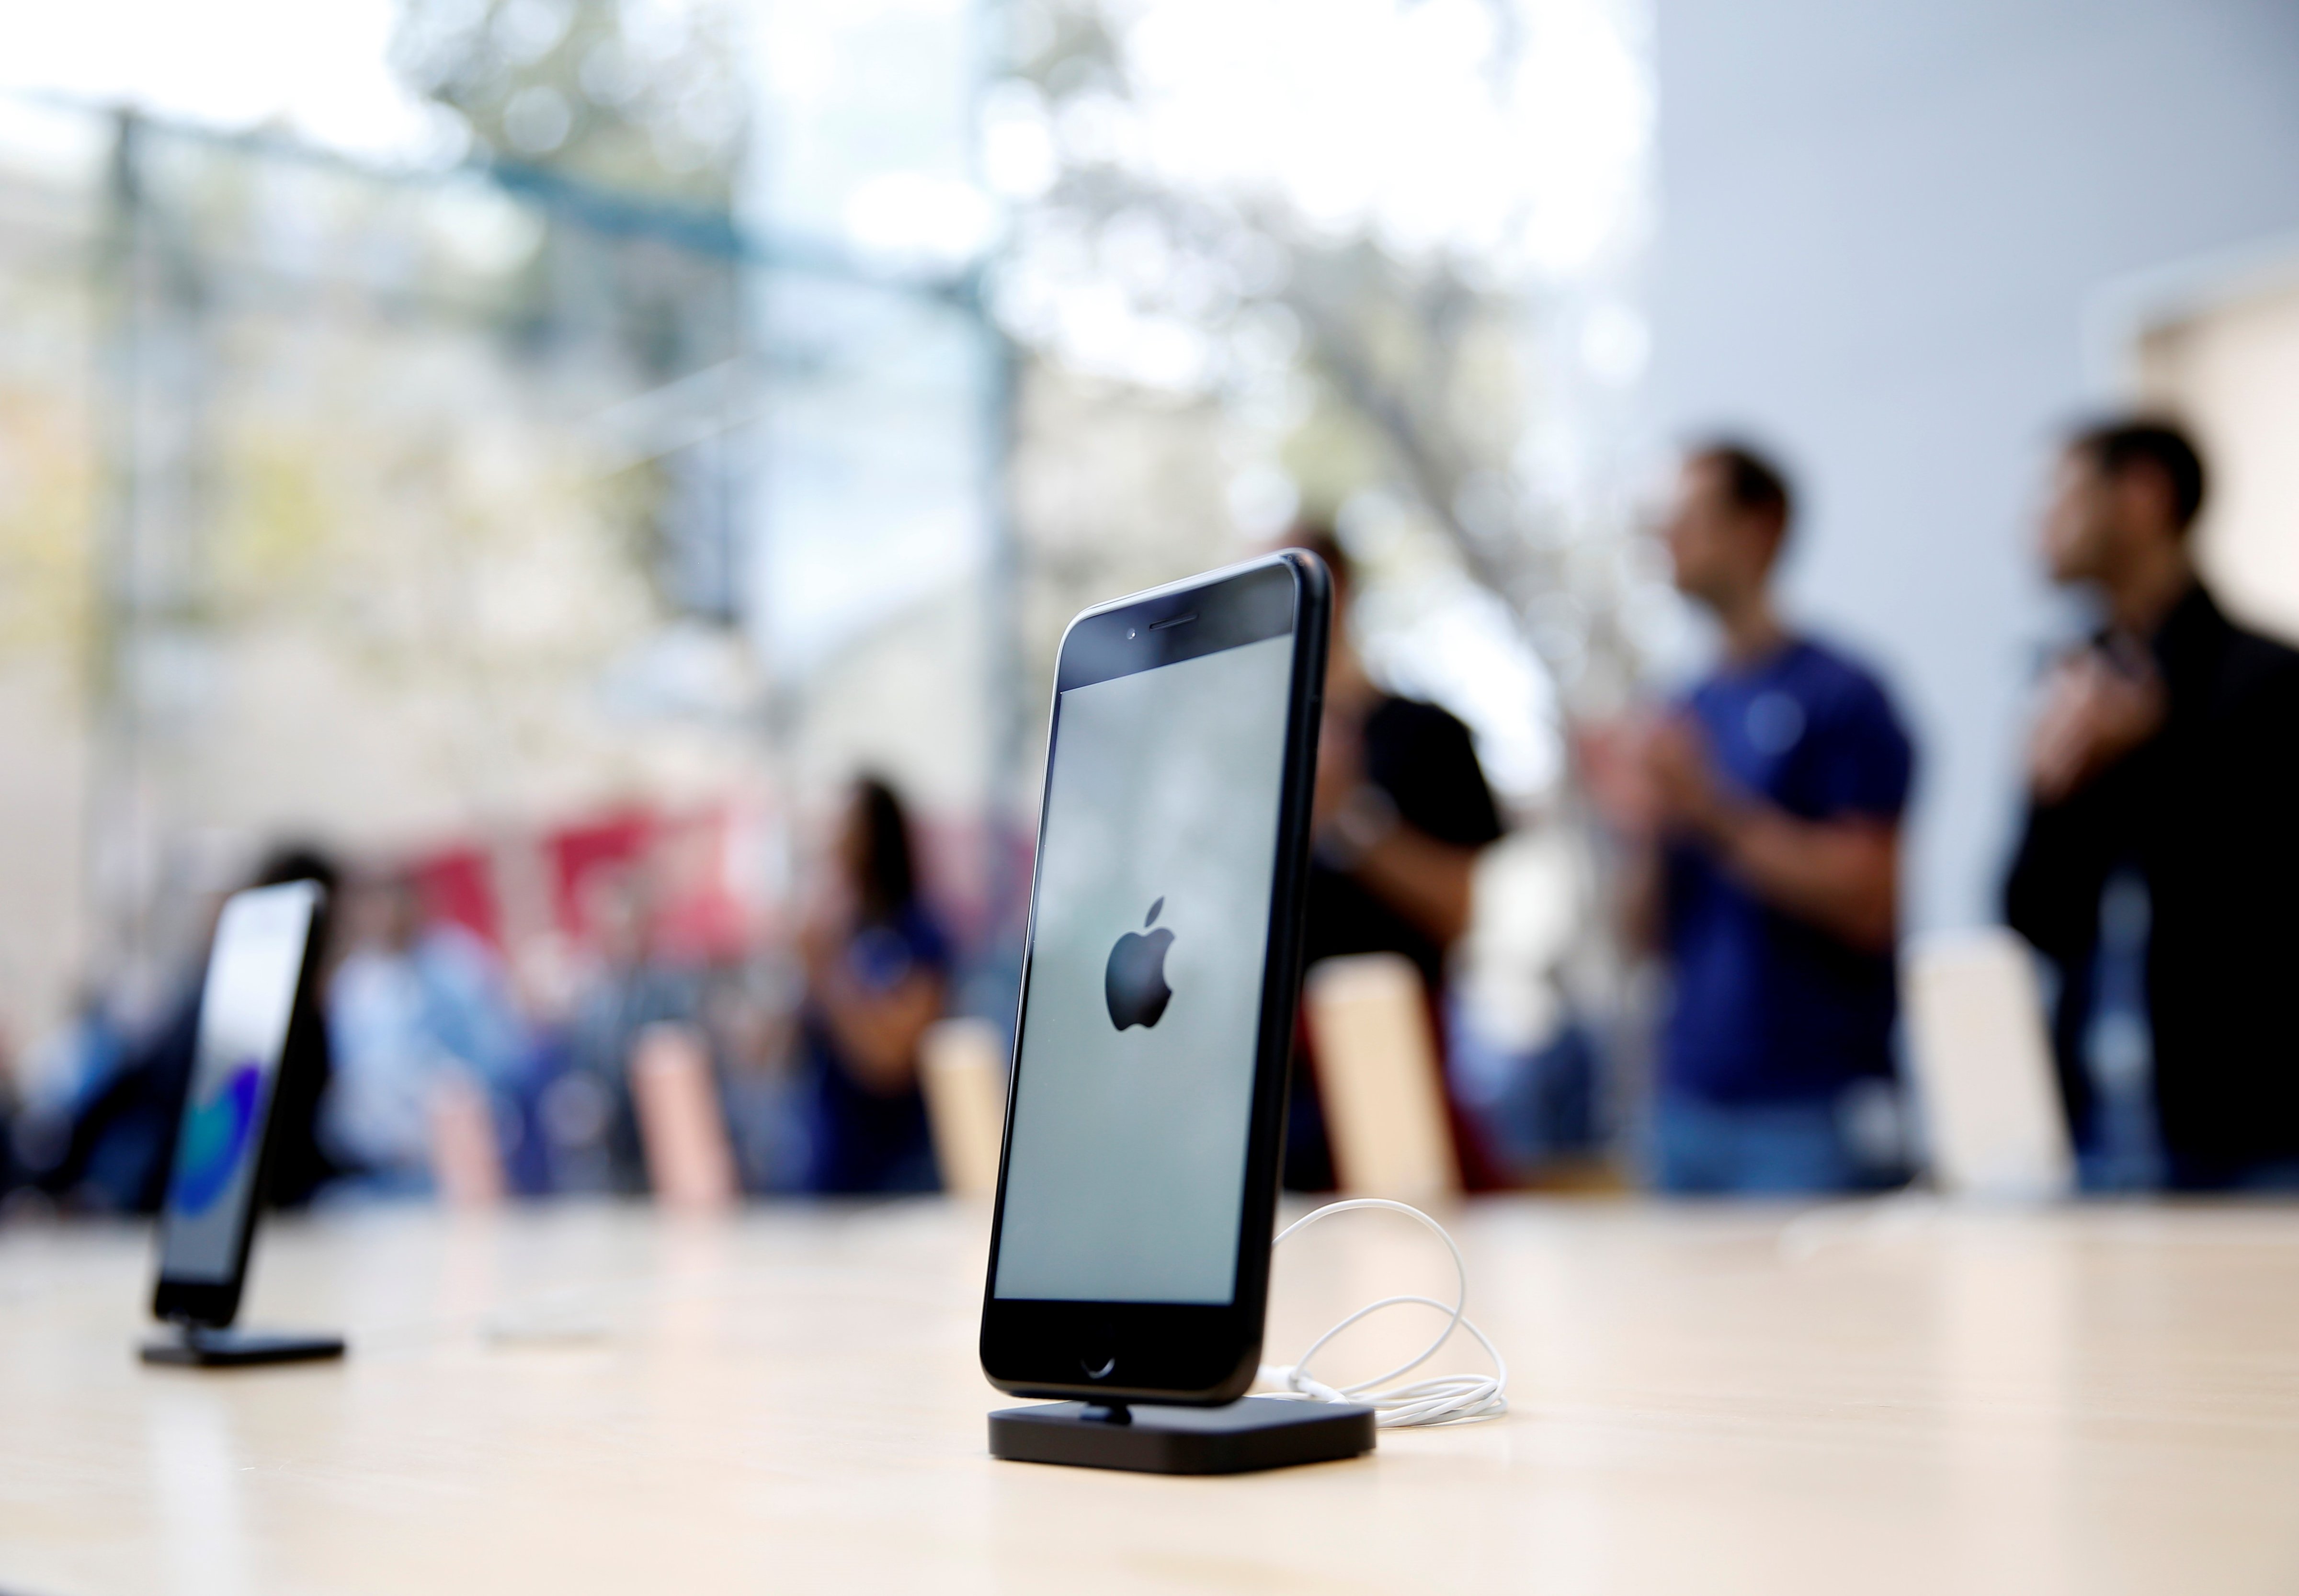 New iPhone models are seen on display at the Apple store, in Palo Alto, California, United States on September 16, 2016. (Anadolu Agency&mdash;Getty Images)